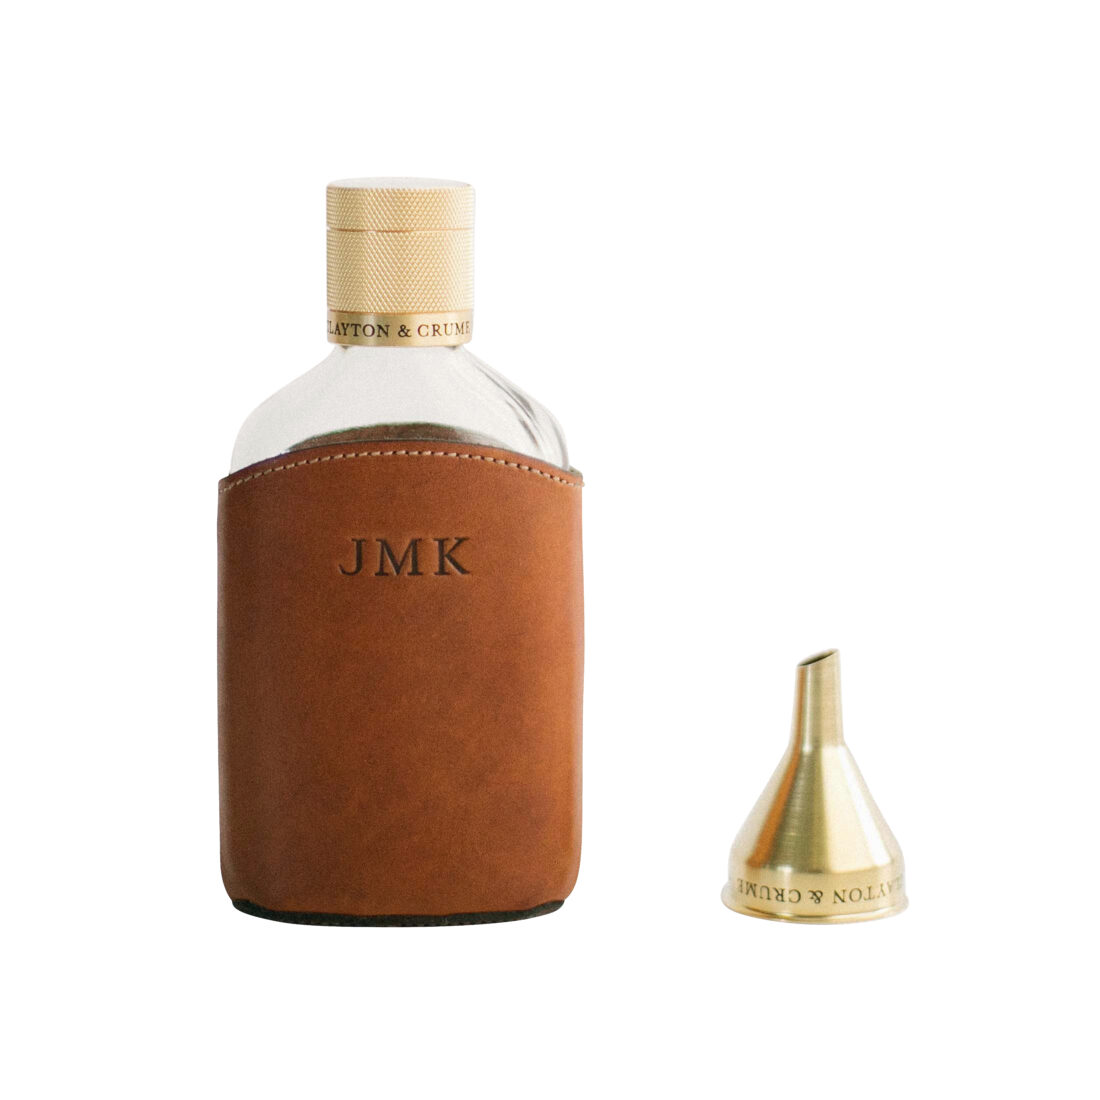 Description: Clayton & Crume English saddle leather-wrapped glass flask with solid brass cap and funnel, $125.